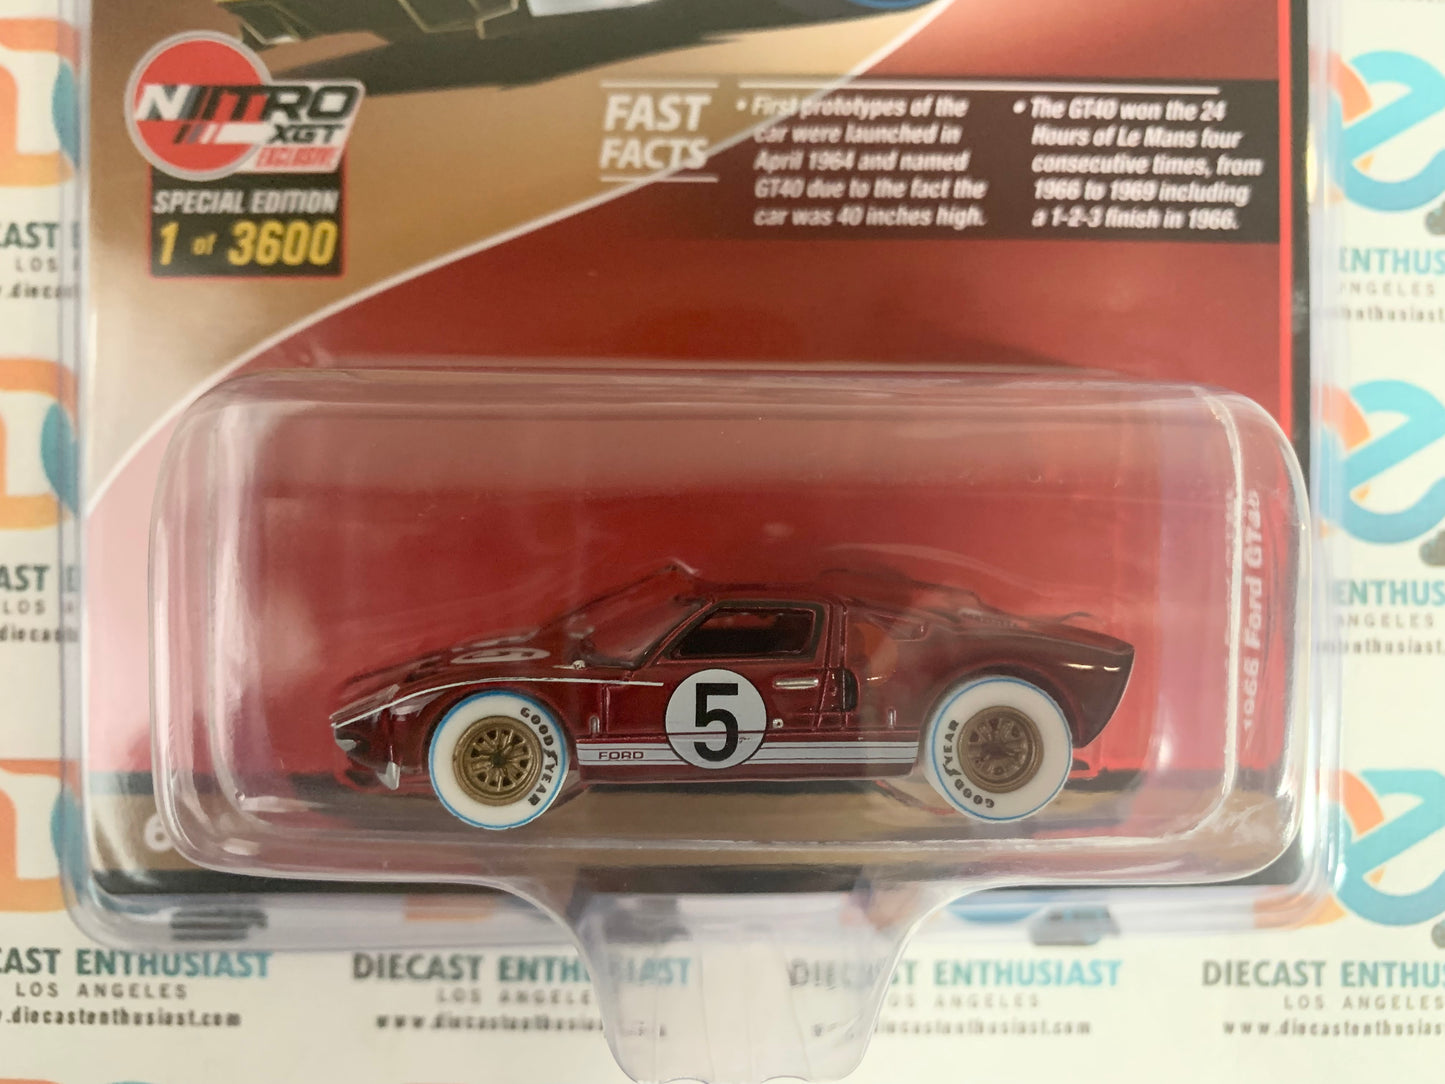 CHASE ULTRA RED Auto World Nitro XGT Exclusives 1966 Ford GT40 Gold #5 1:64